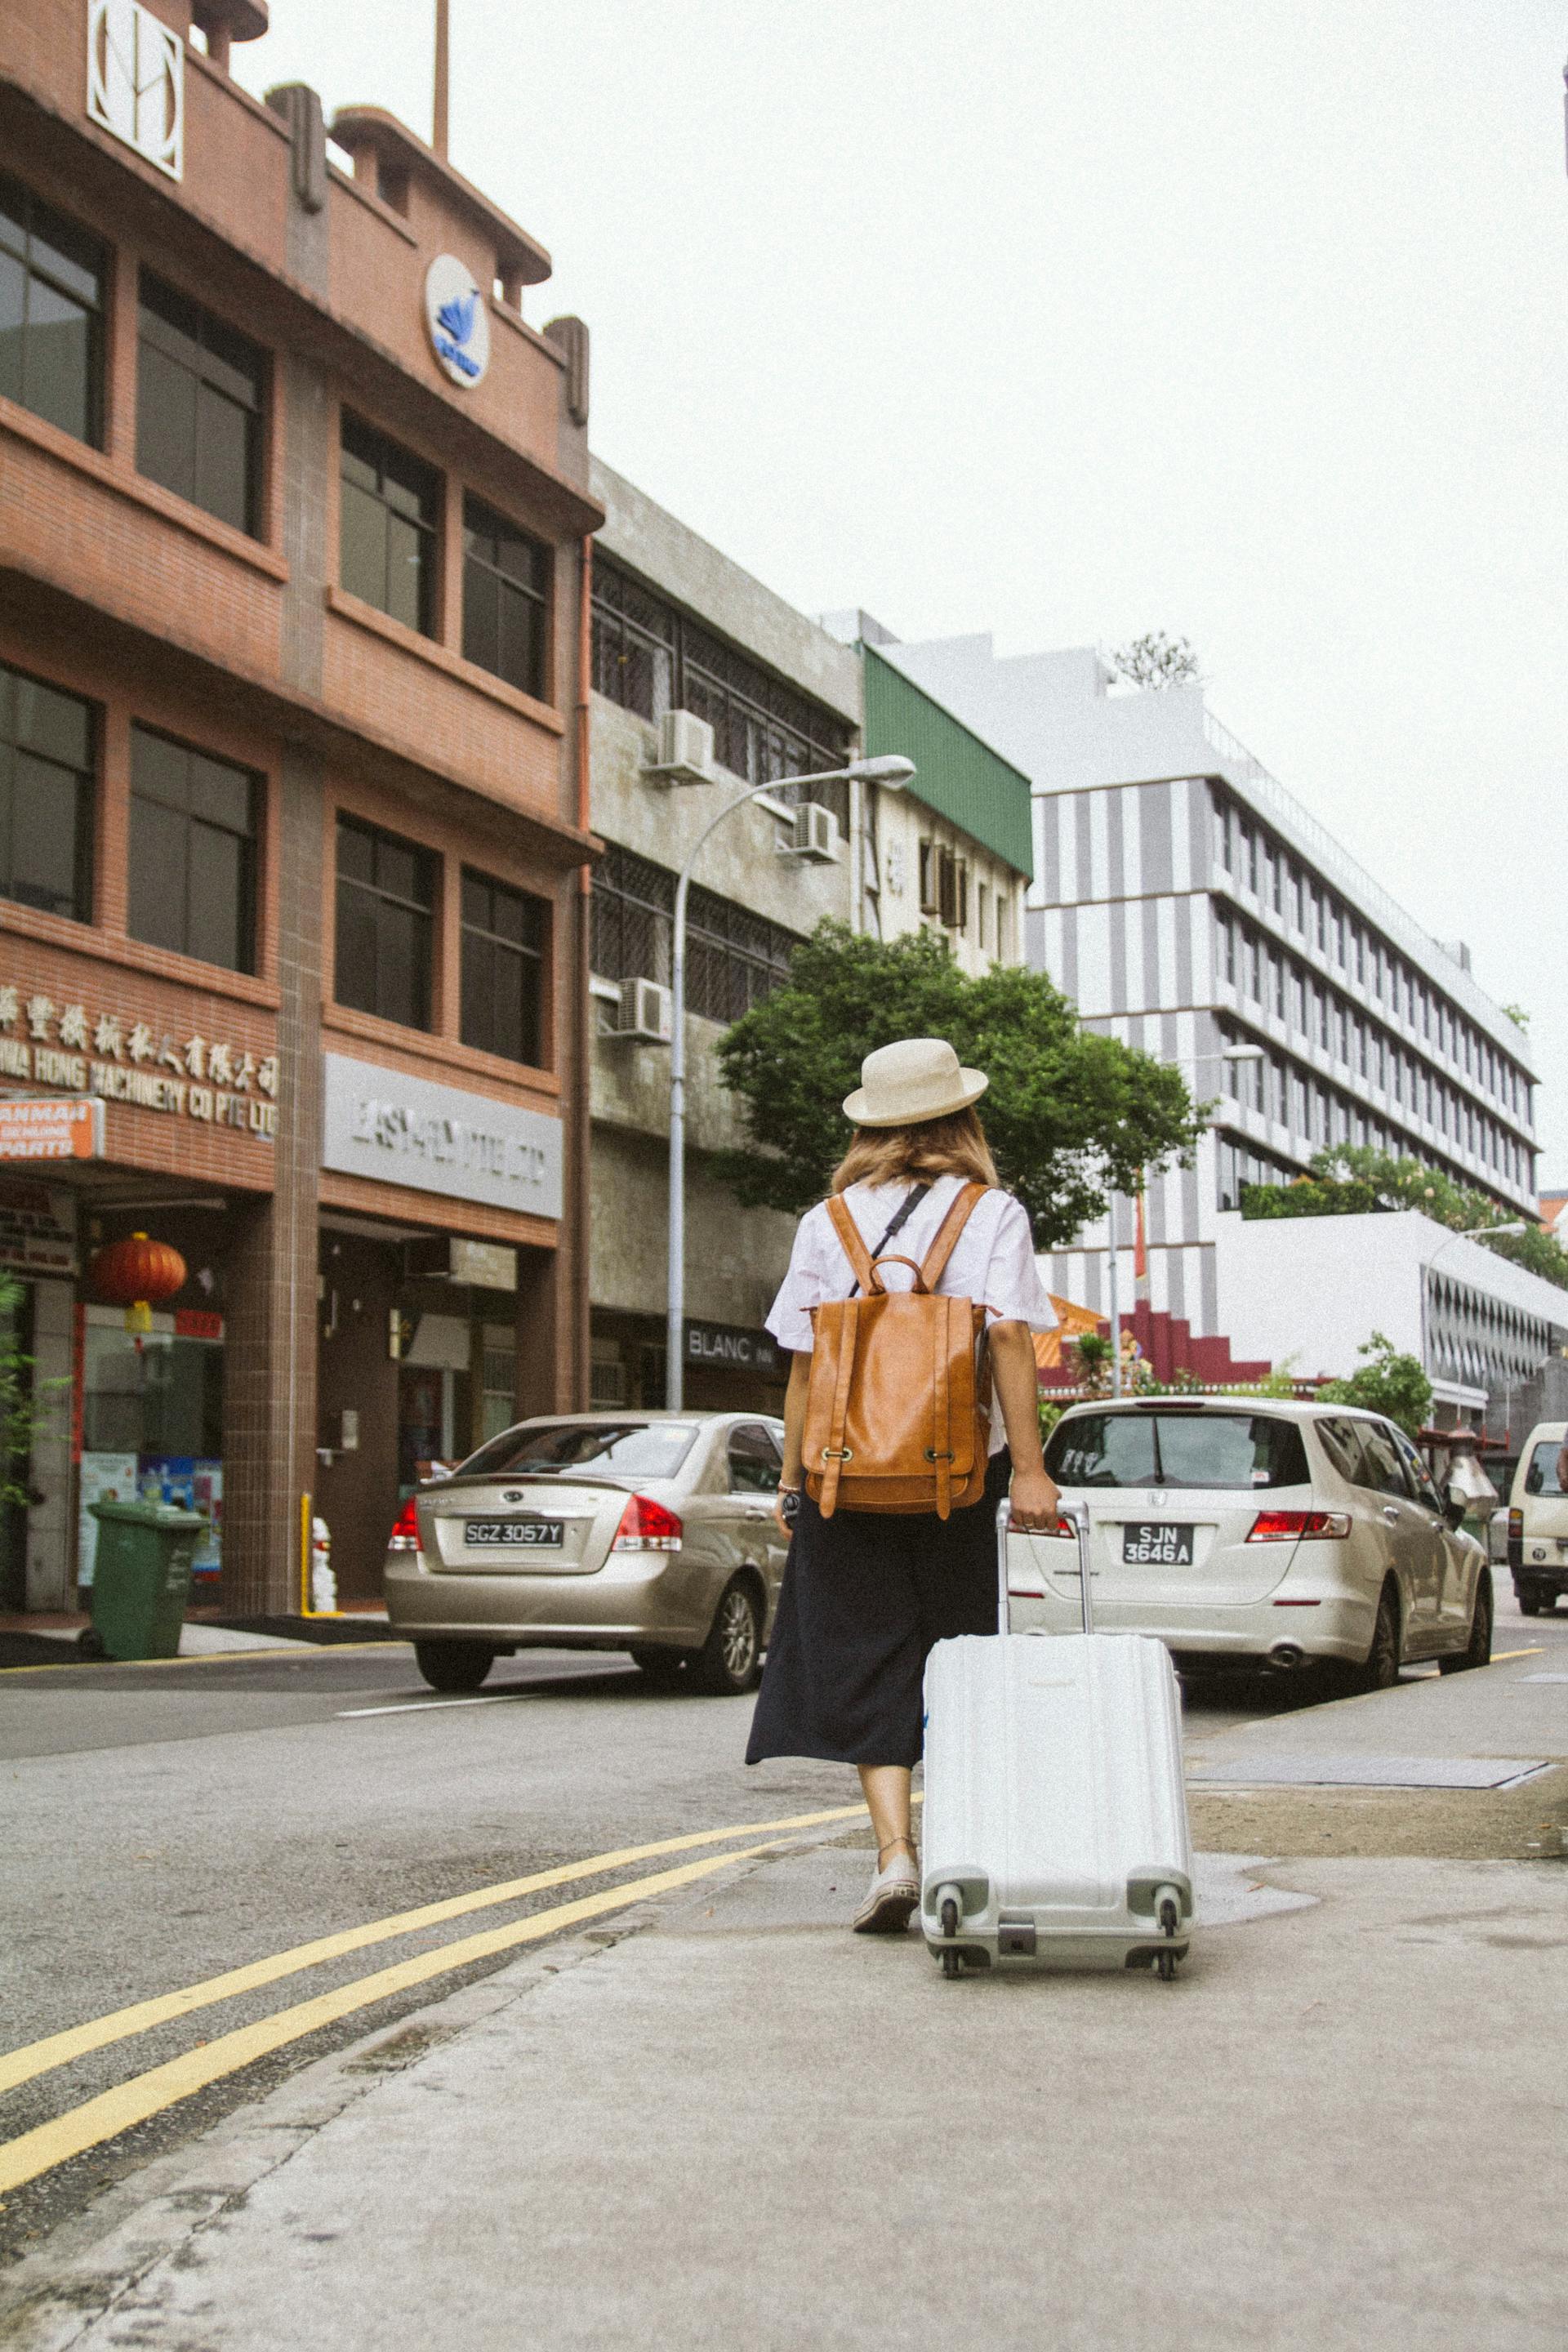 A woman with a suitcase | Source: Pexels